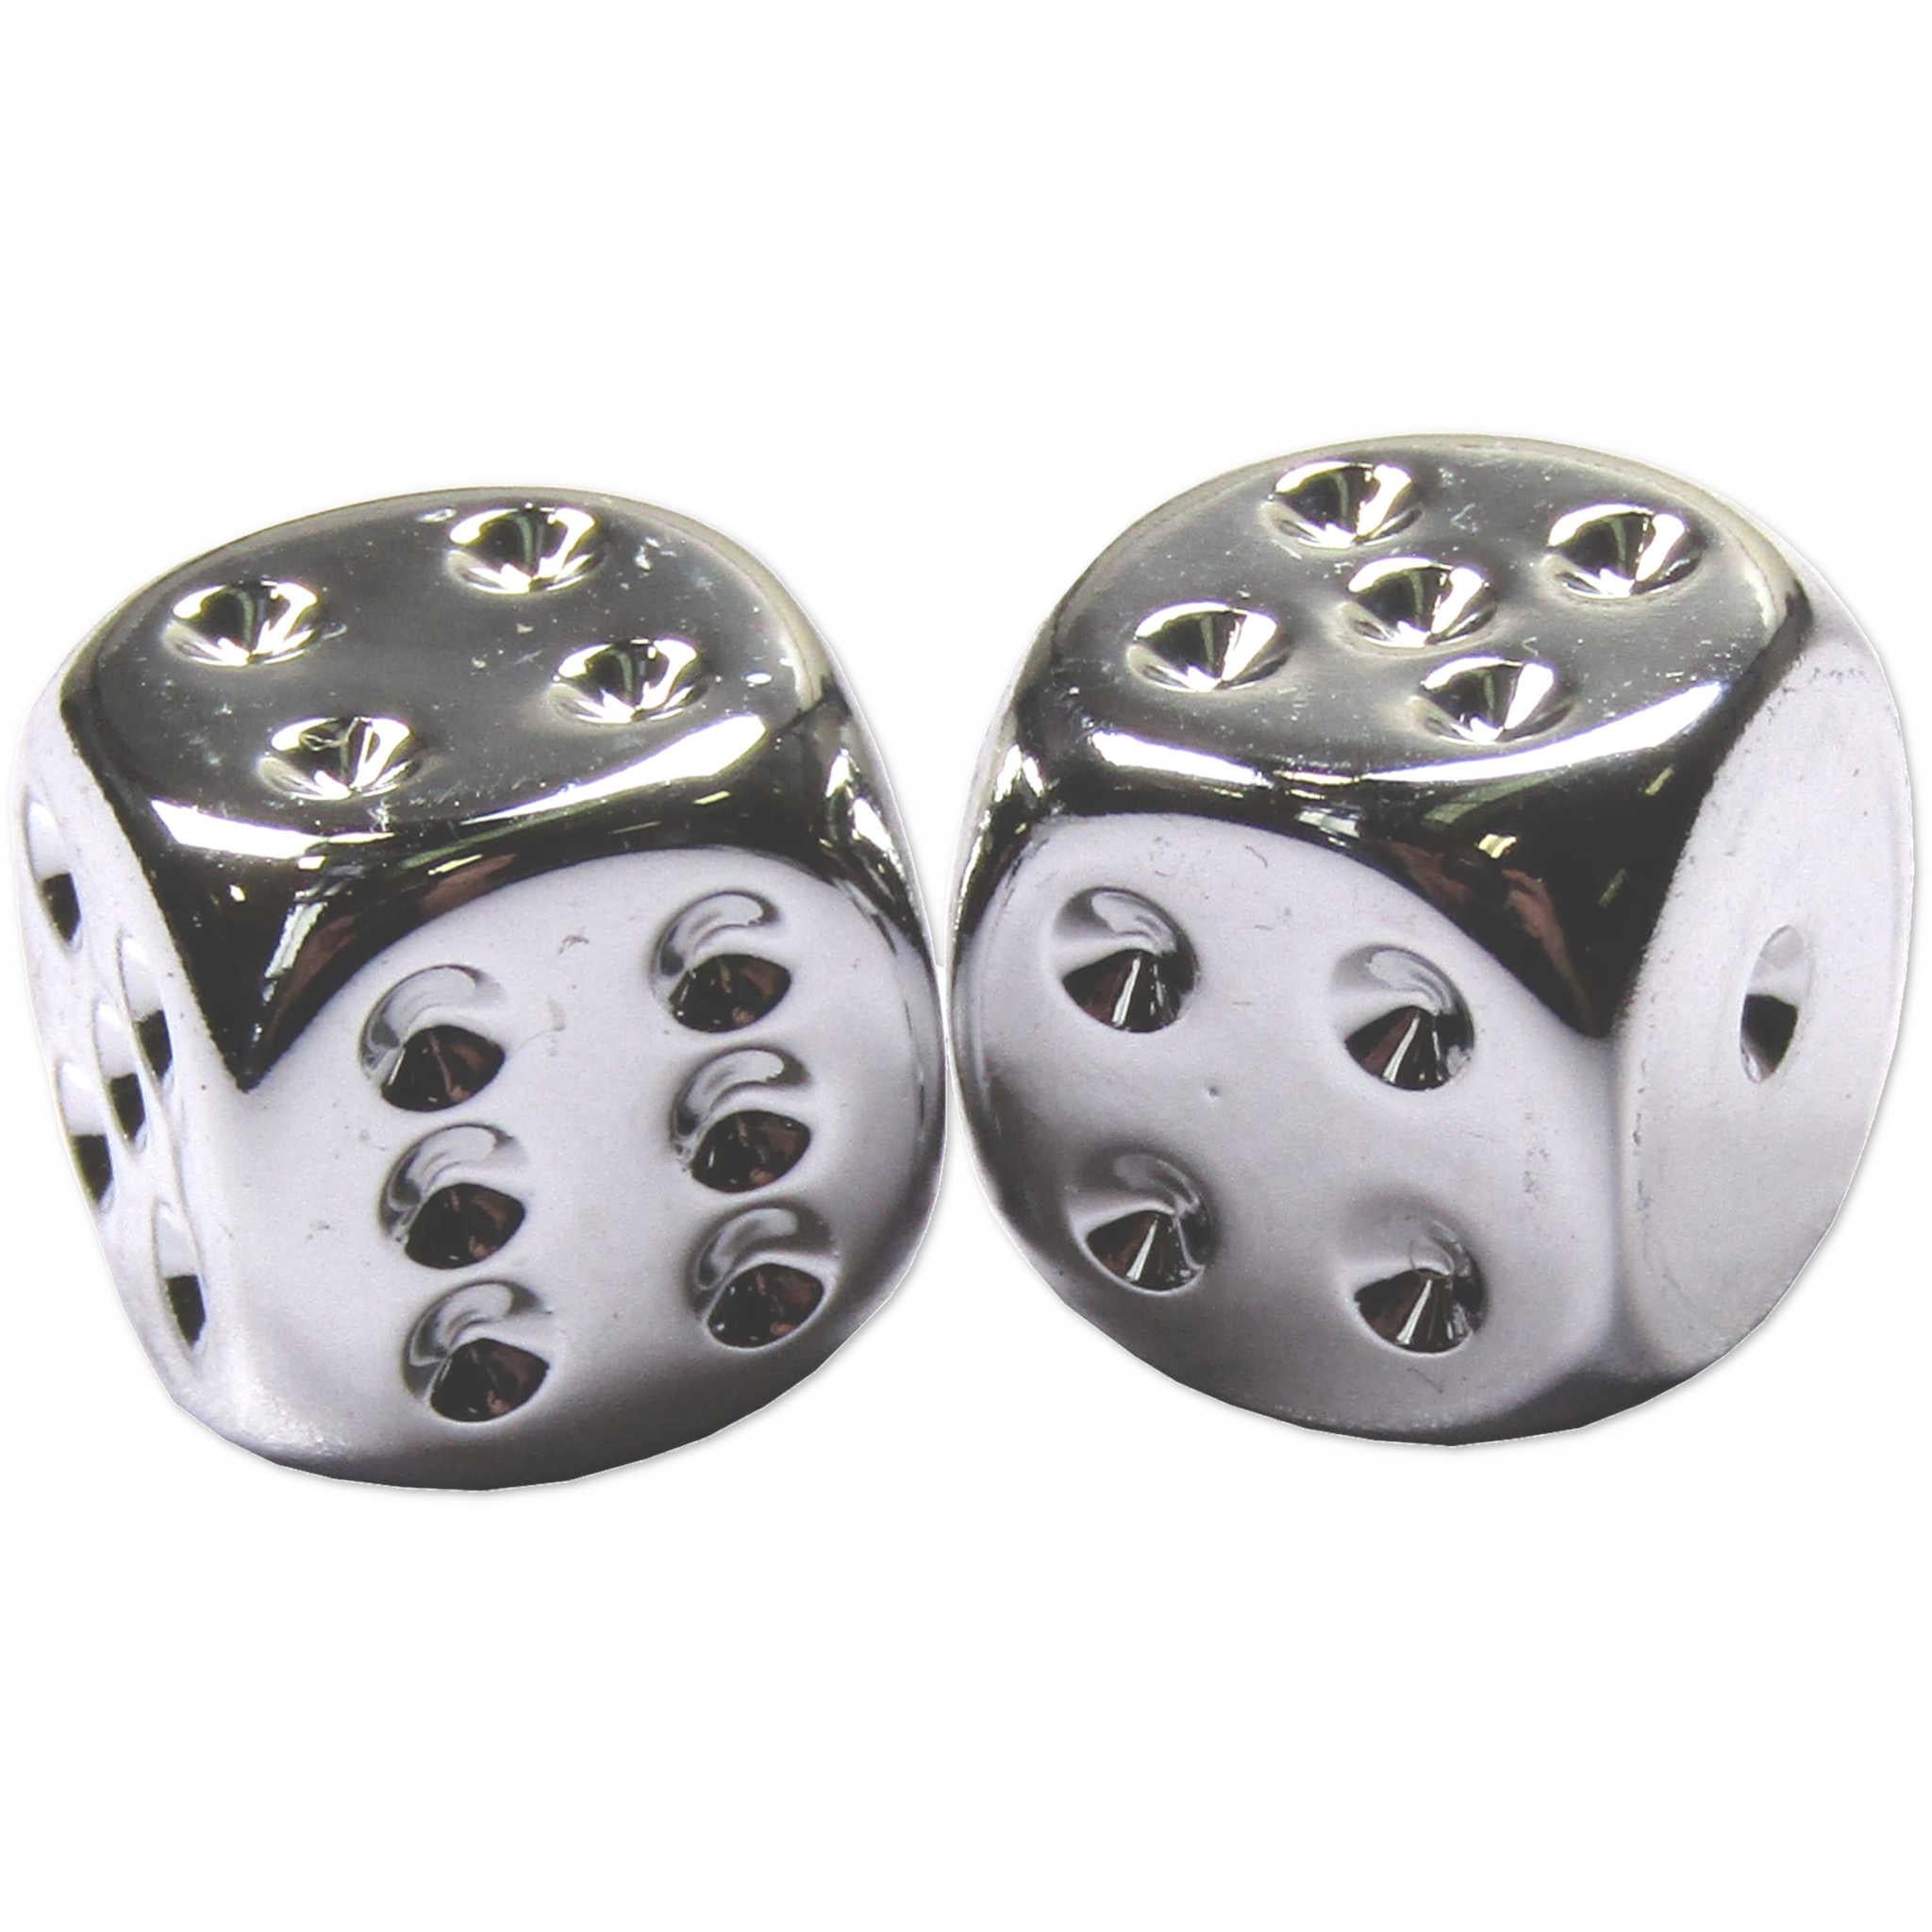 Pair of Chessex Silver Metallic Plated 16mm d6 Six Sided Dice Block CHX 29007